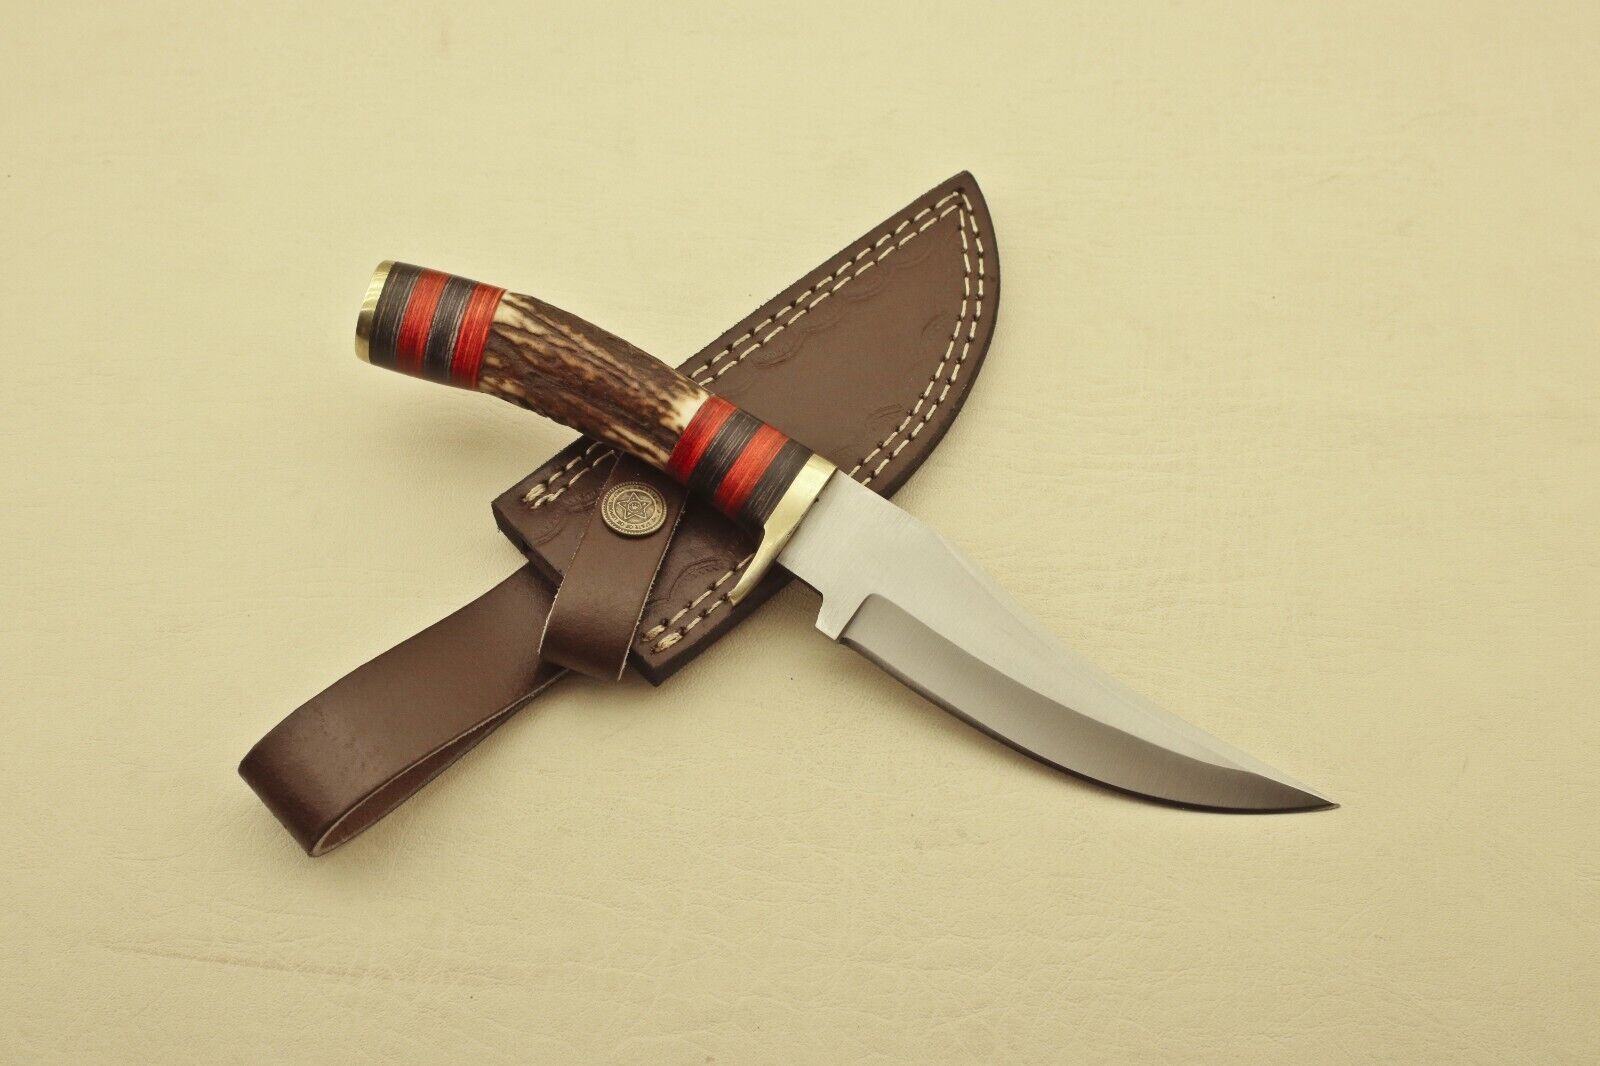 Custom Handmade Stainless Steel Hunting Camping Knife With Stag Horn |Sheath EDC